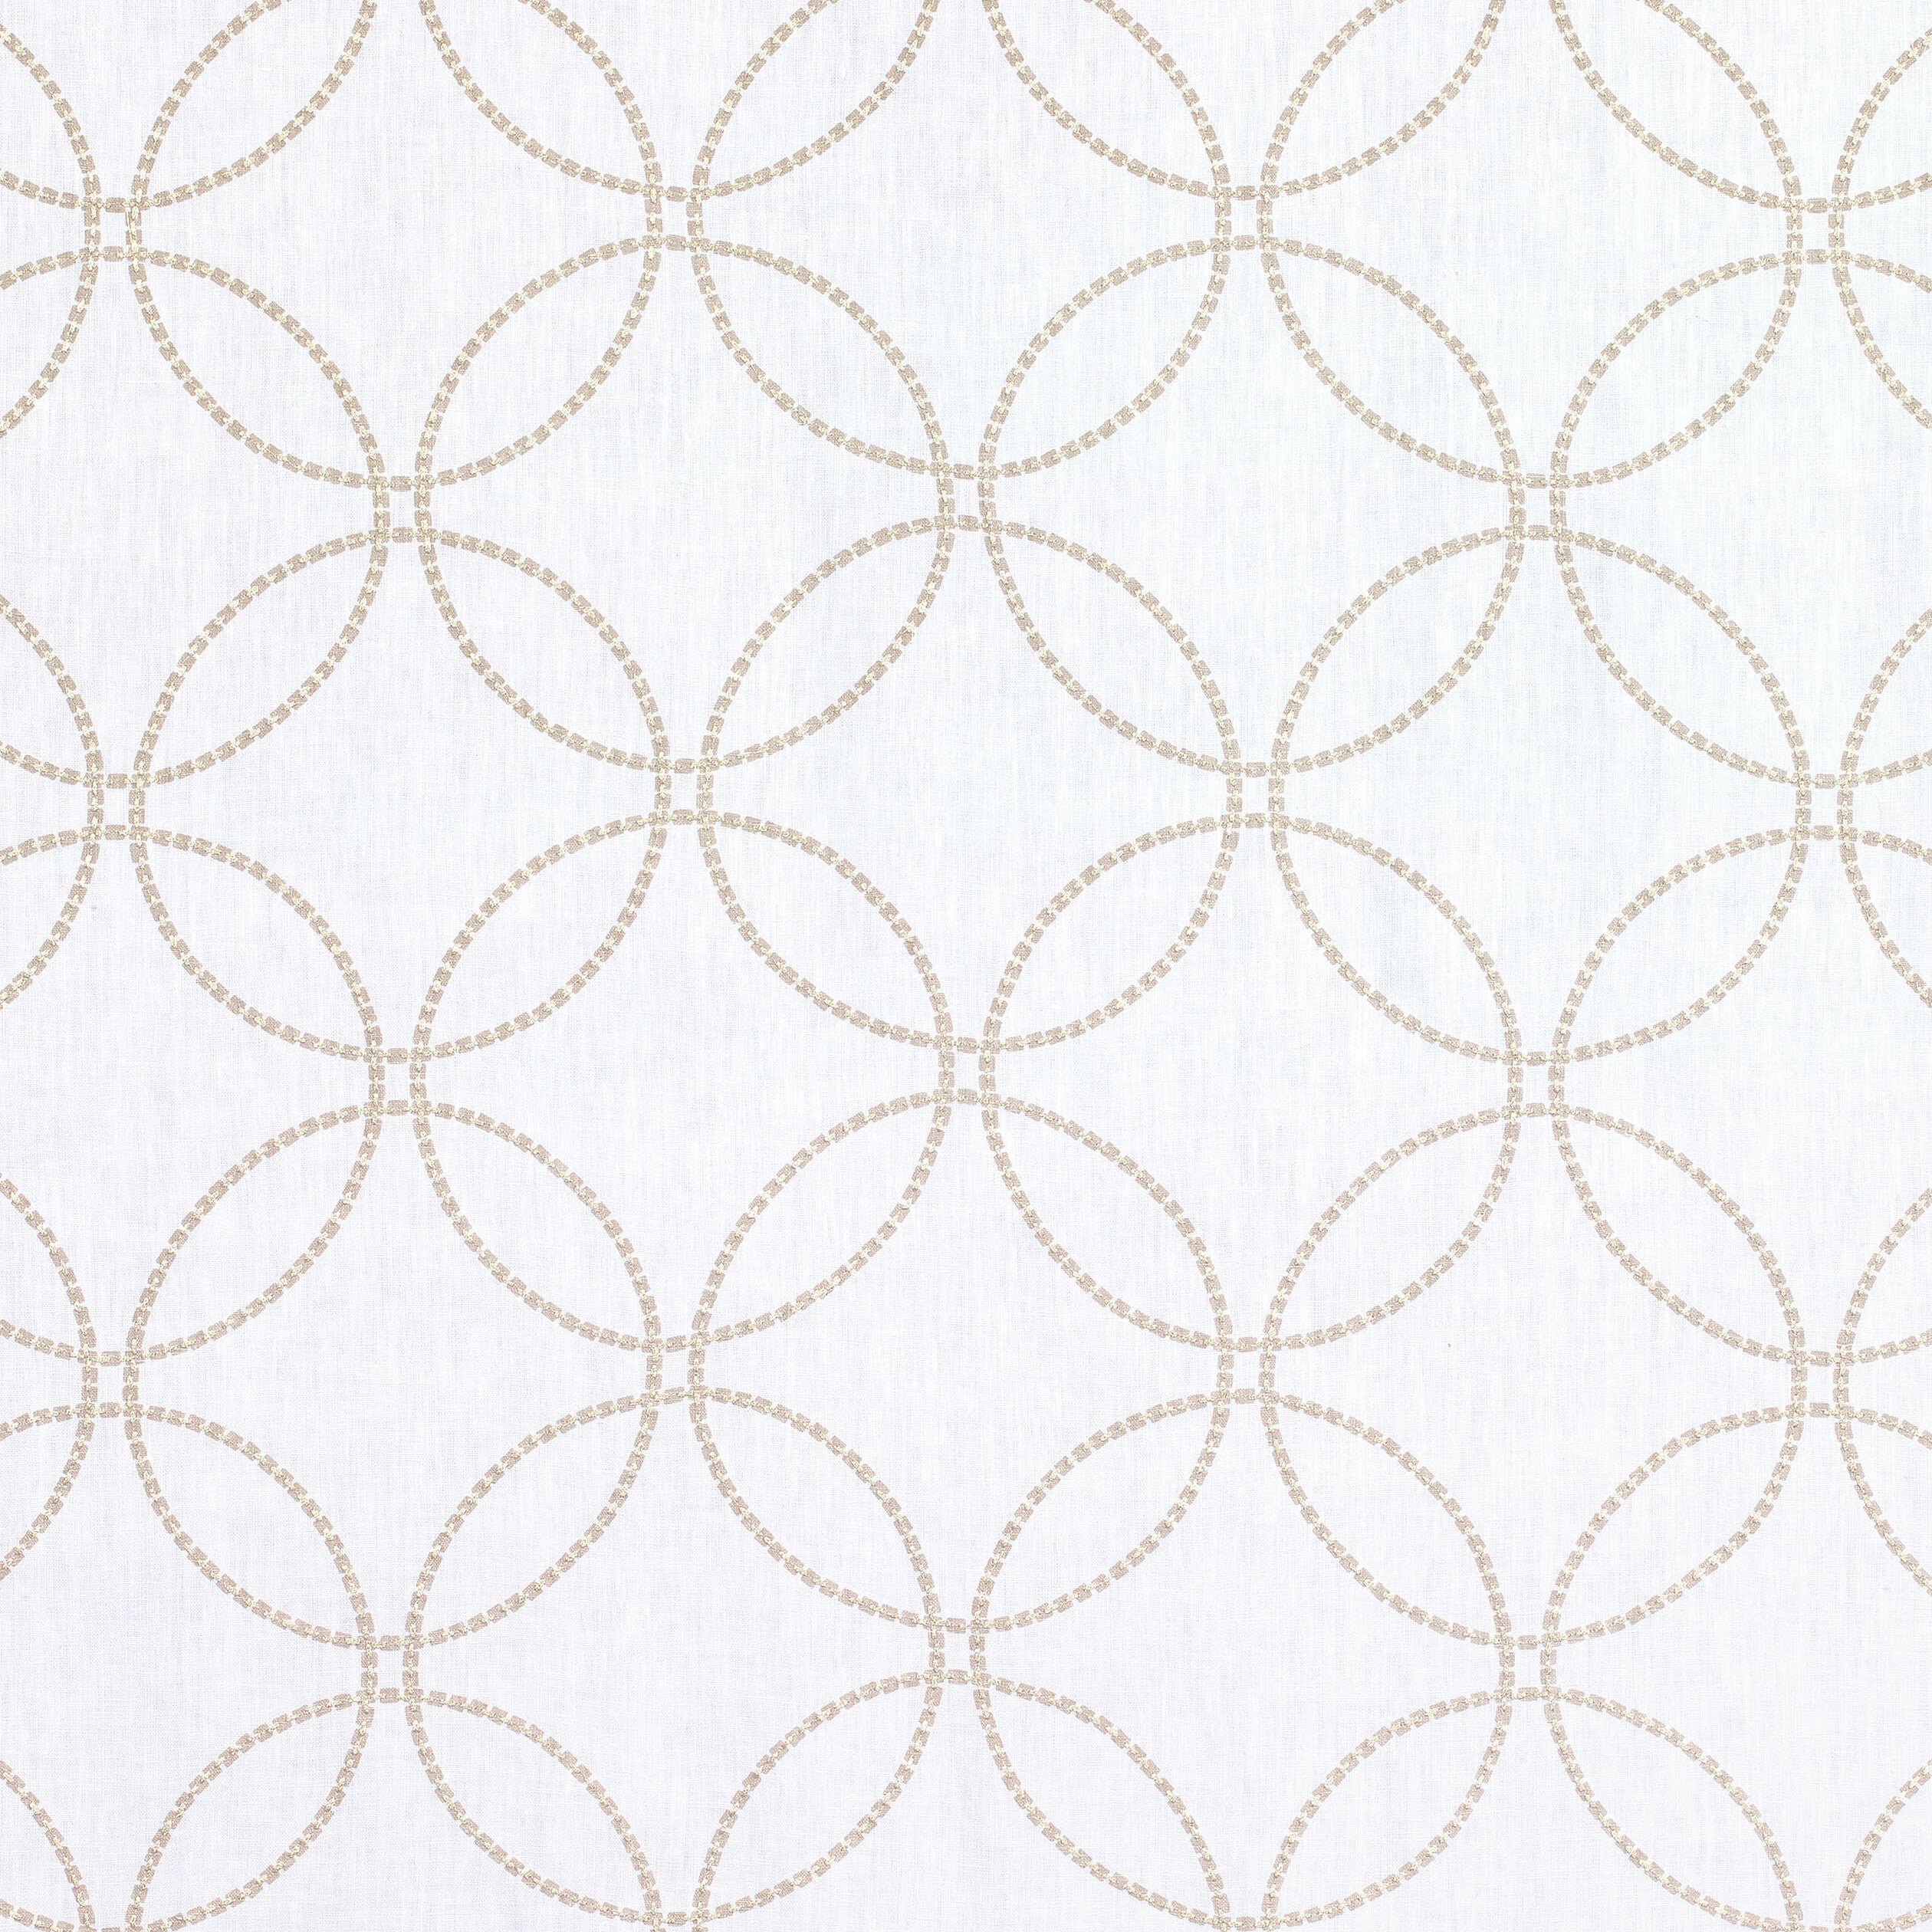 Ronda fabric in white color - pattern number AW9119 - by Anna French in the Natural Glimmer collection